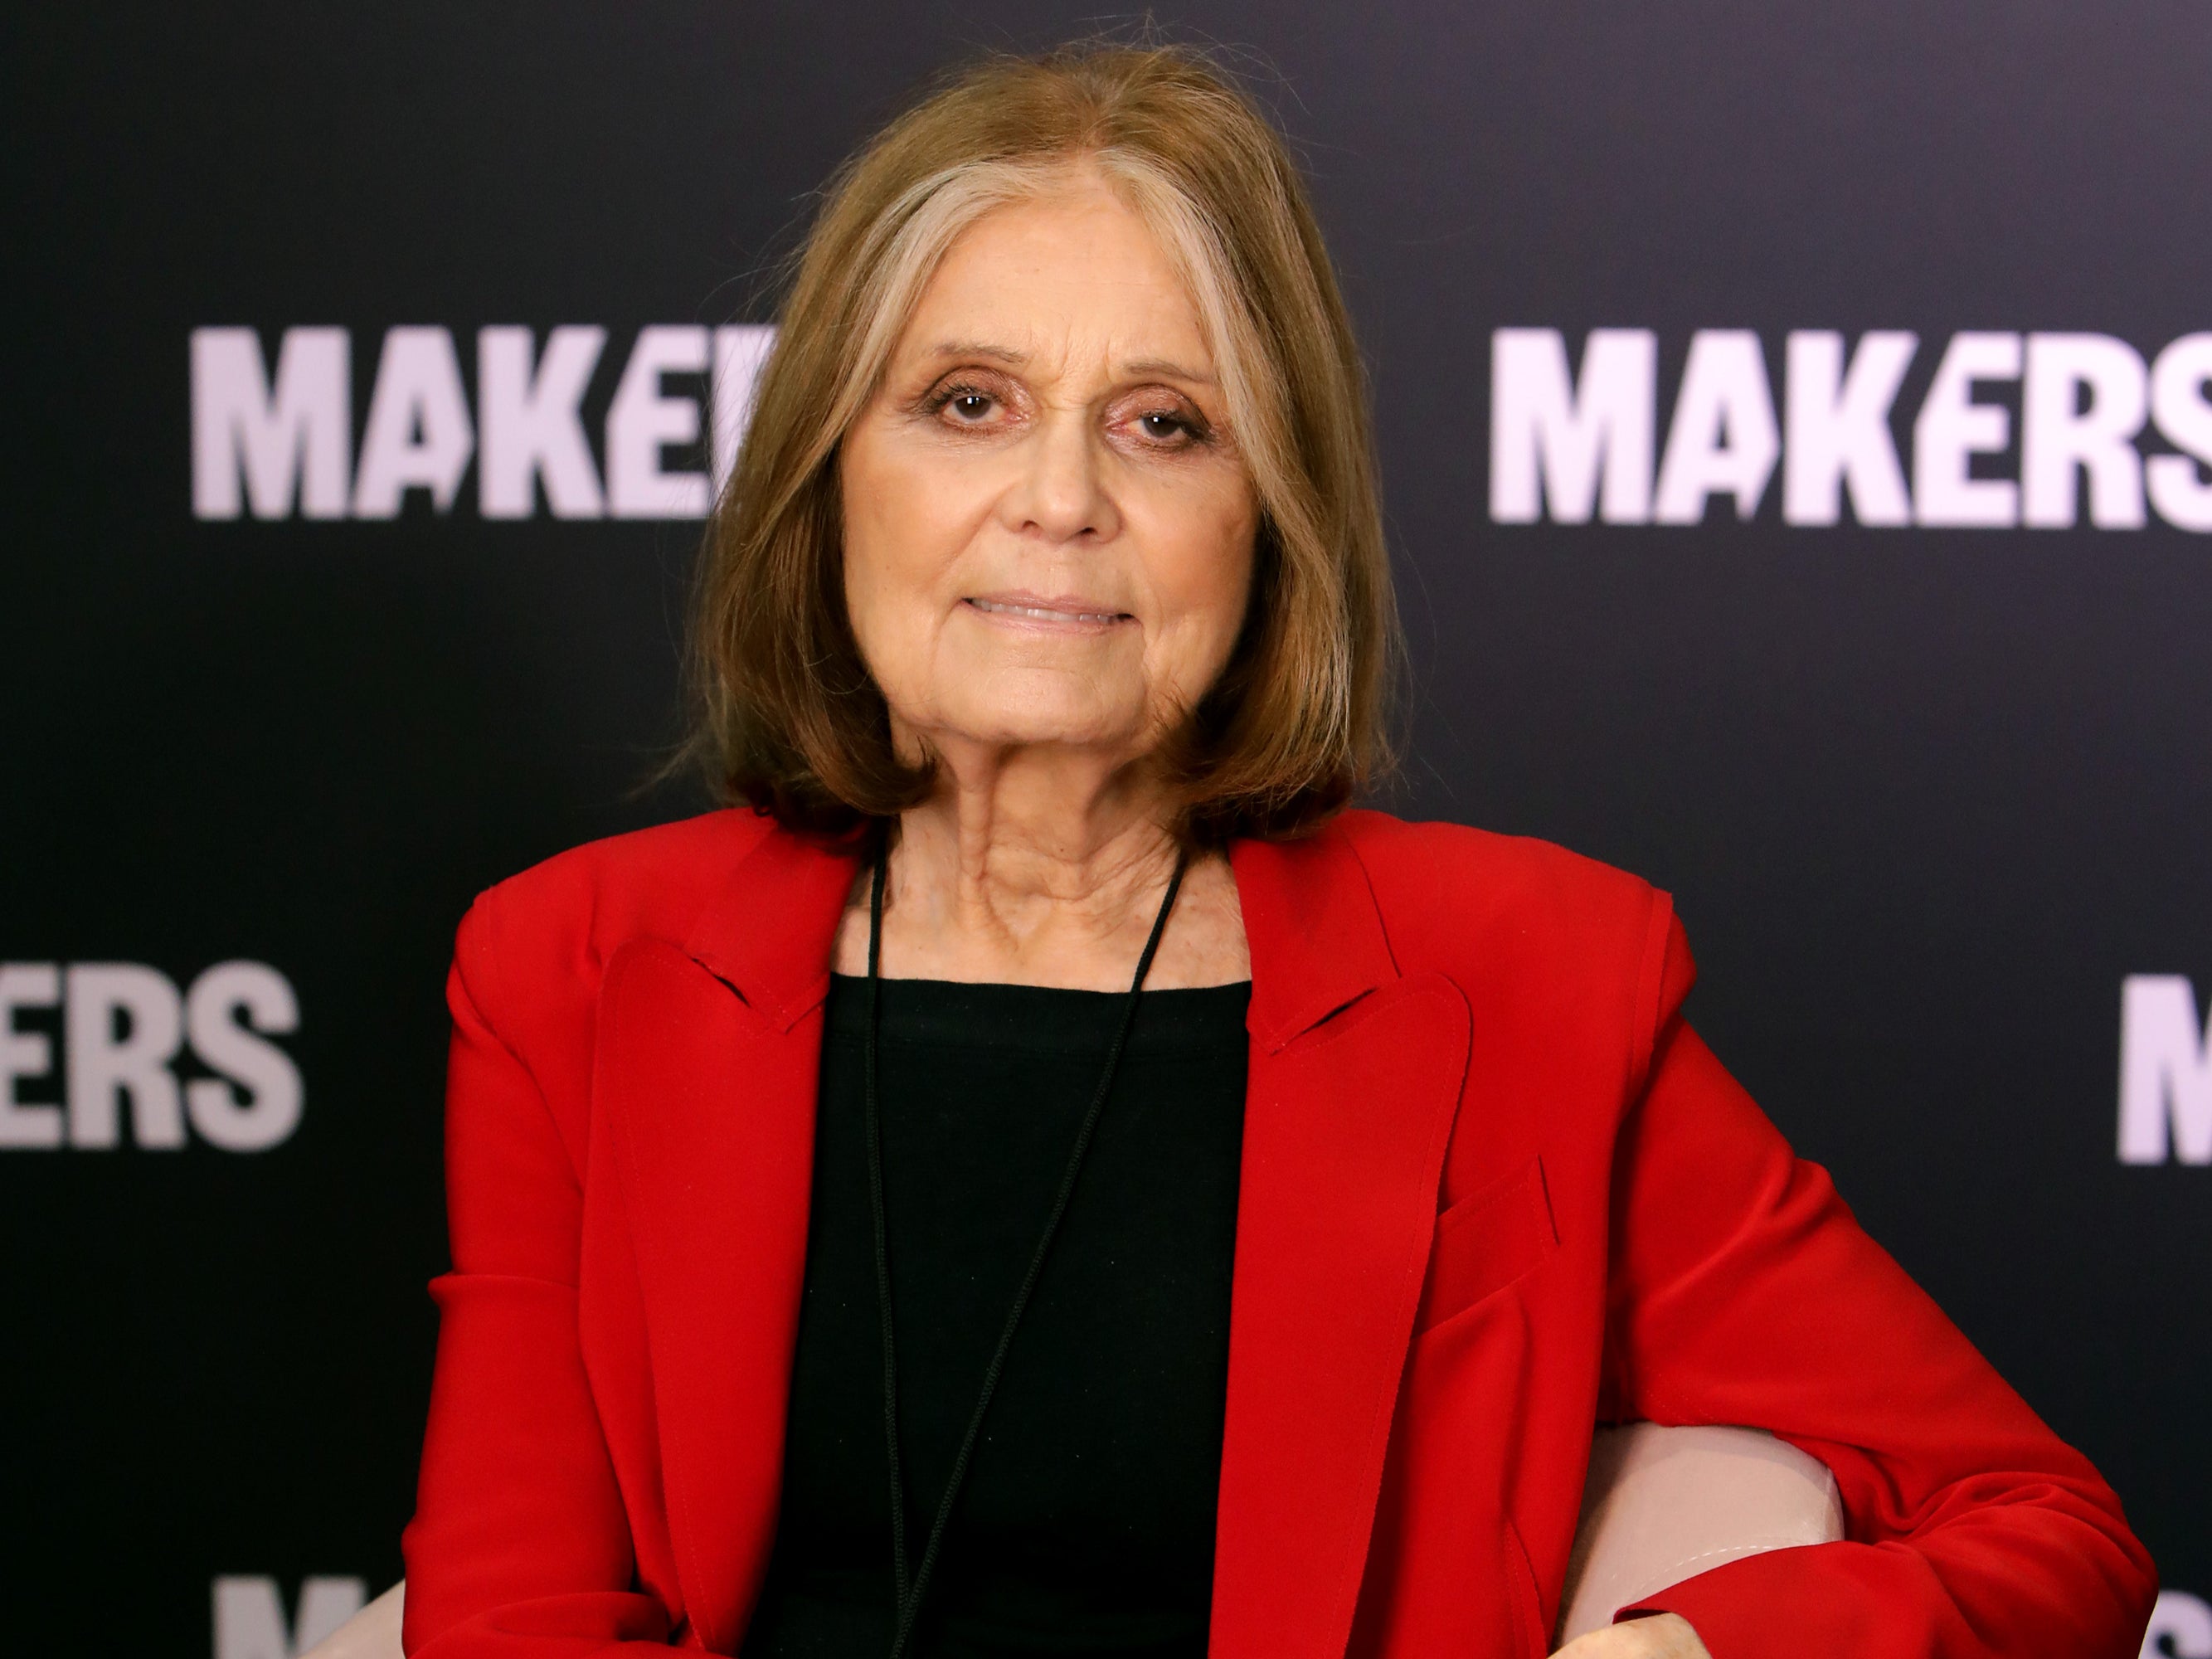 What Gloria Steinem thinks about Marilyn Monroe, American Masters